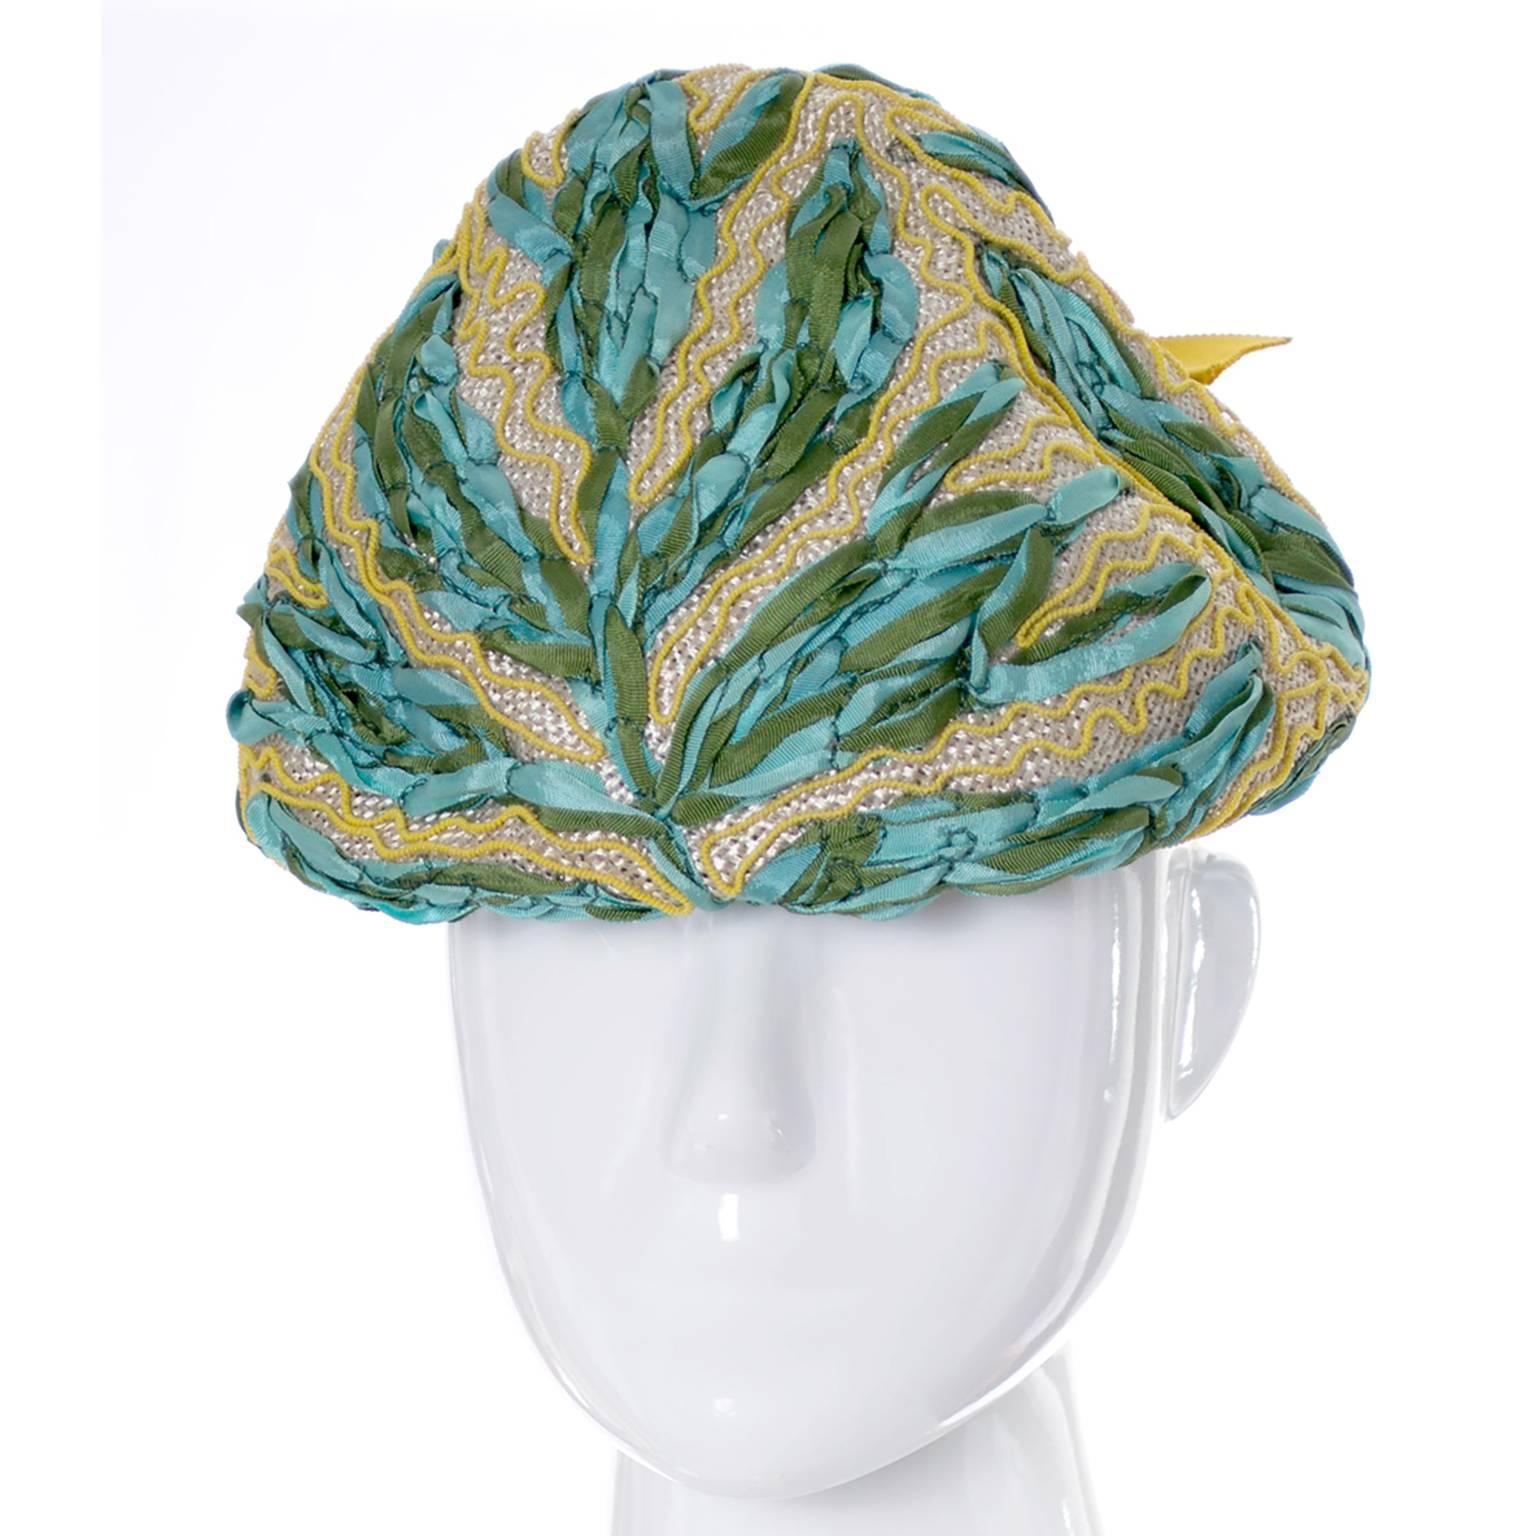 This vintage Lilly Dache Dachettes can be worn all Spring or Summer. The hat comes from a prominent estate of only the finest designer vintage clothing and accessories. Every time I sell something from this amazing estate, I feel a little remorse! 